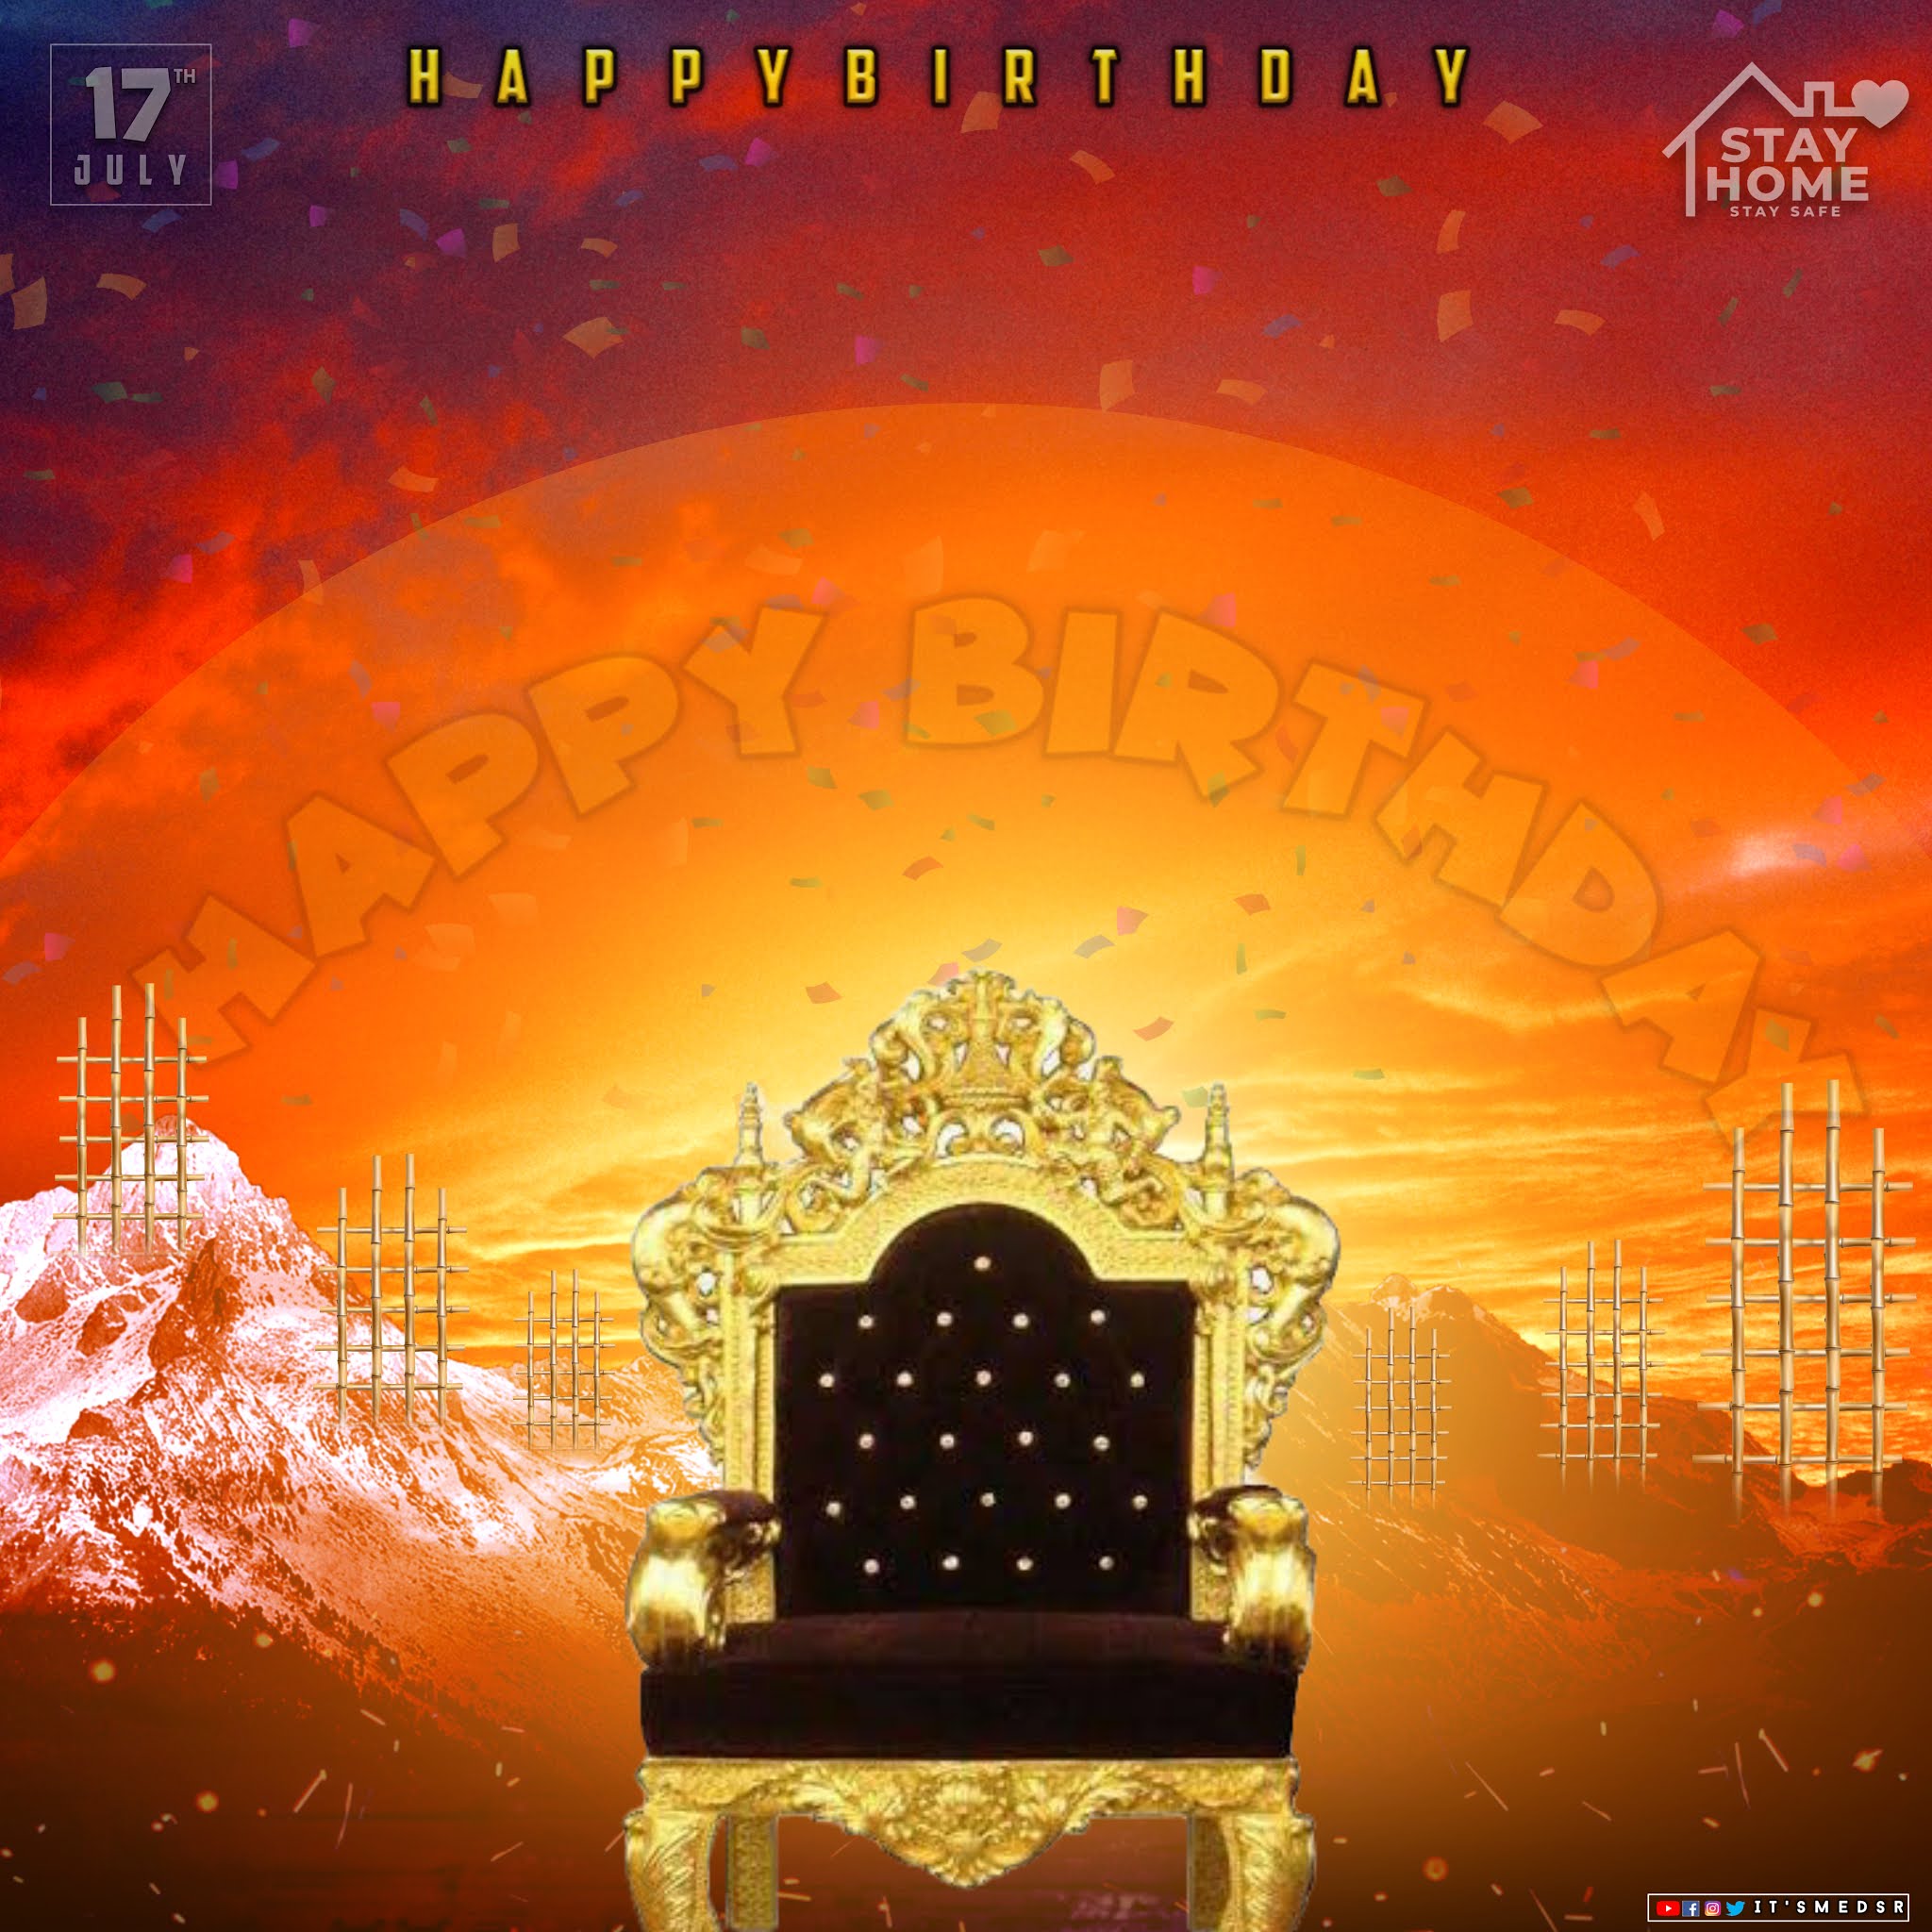 Free Birthday CDP Backgrounds | FREE Birthday Backgrounds download